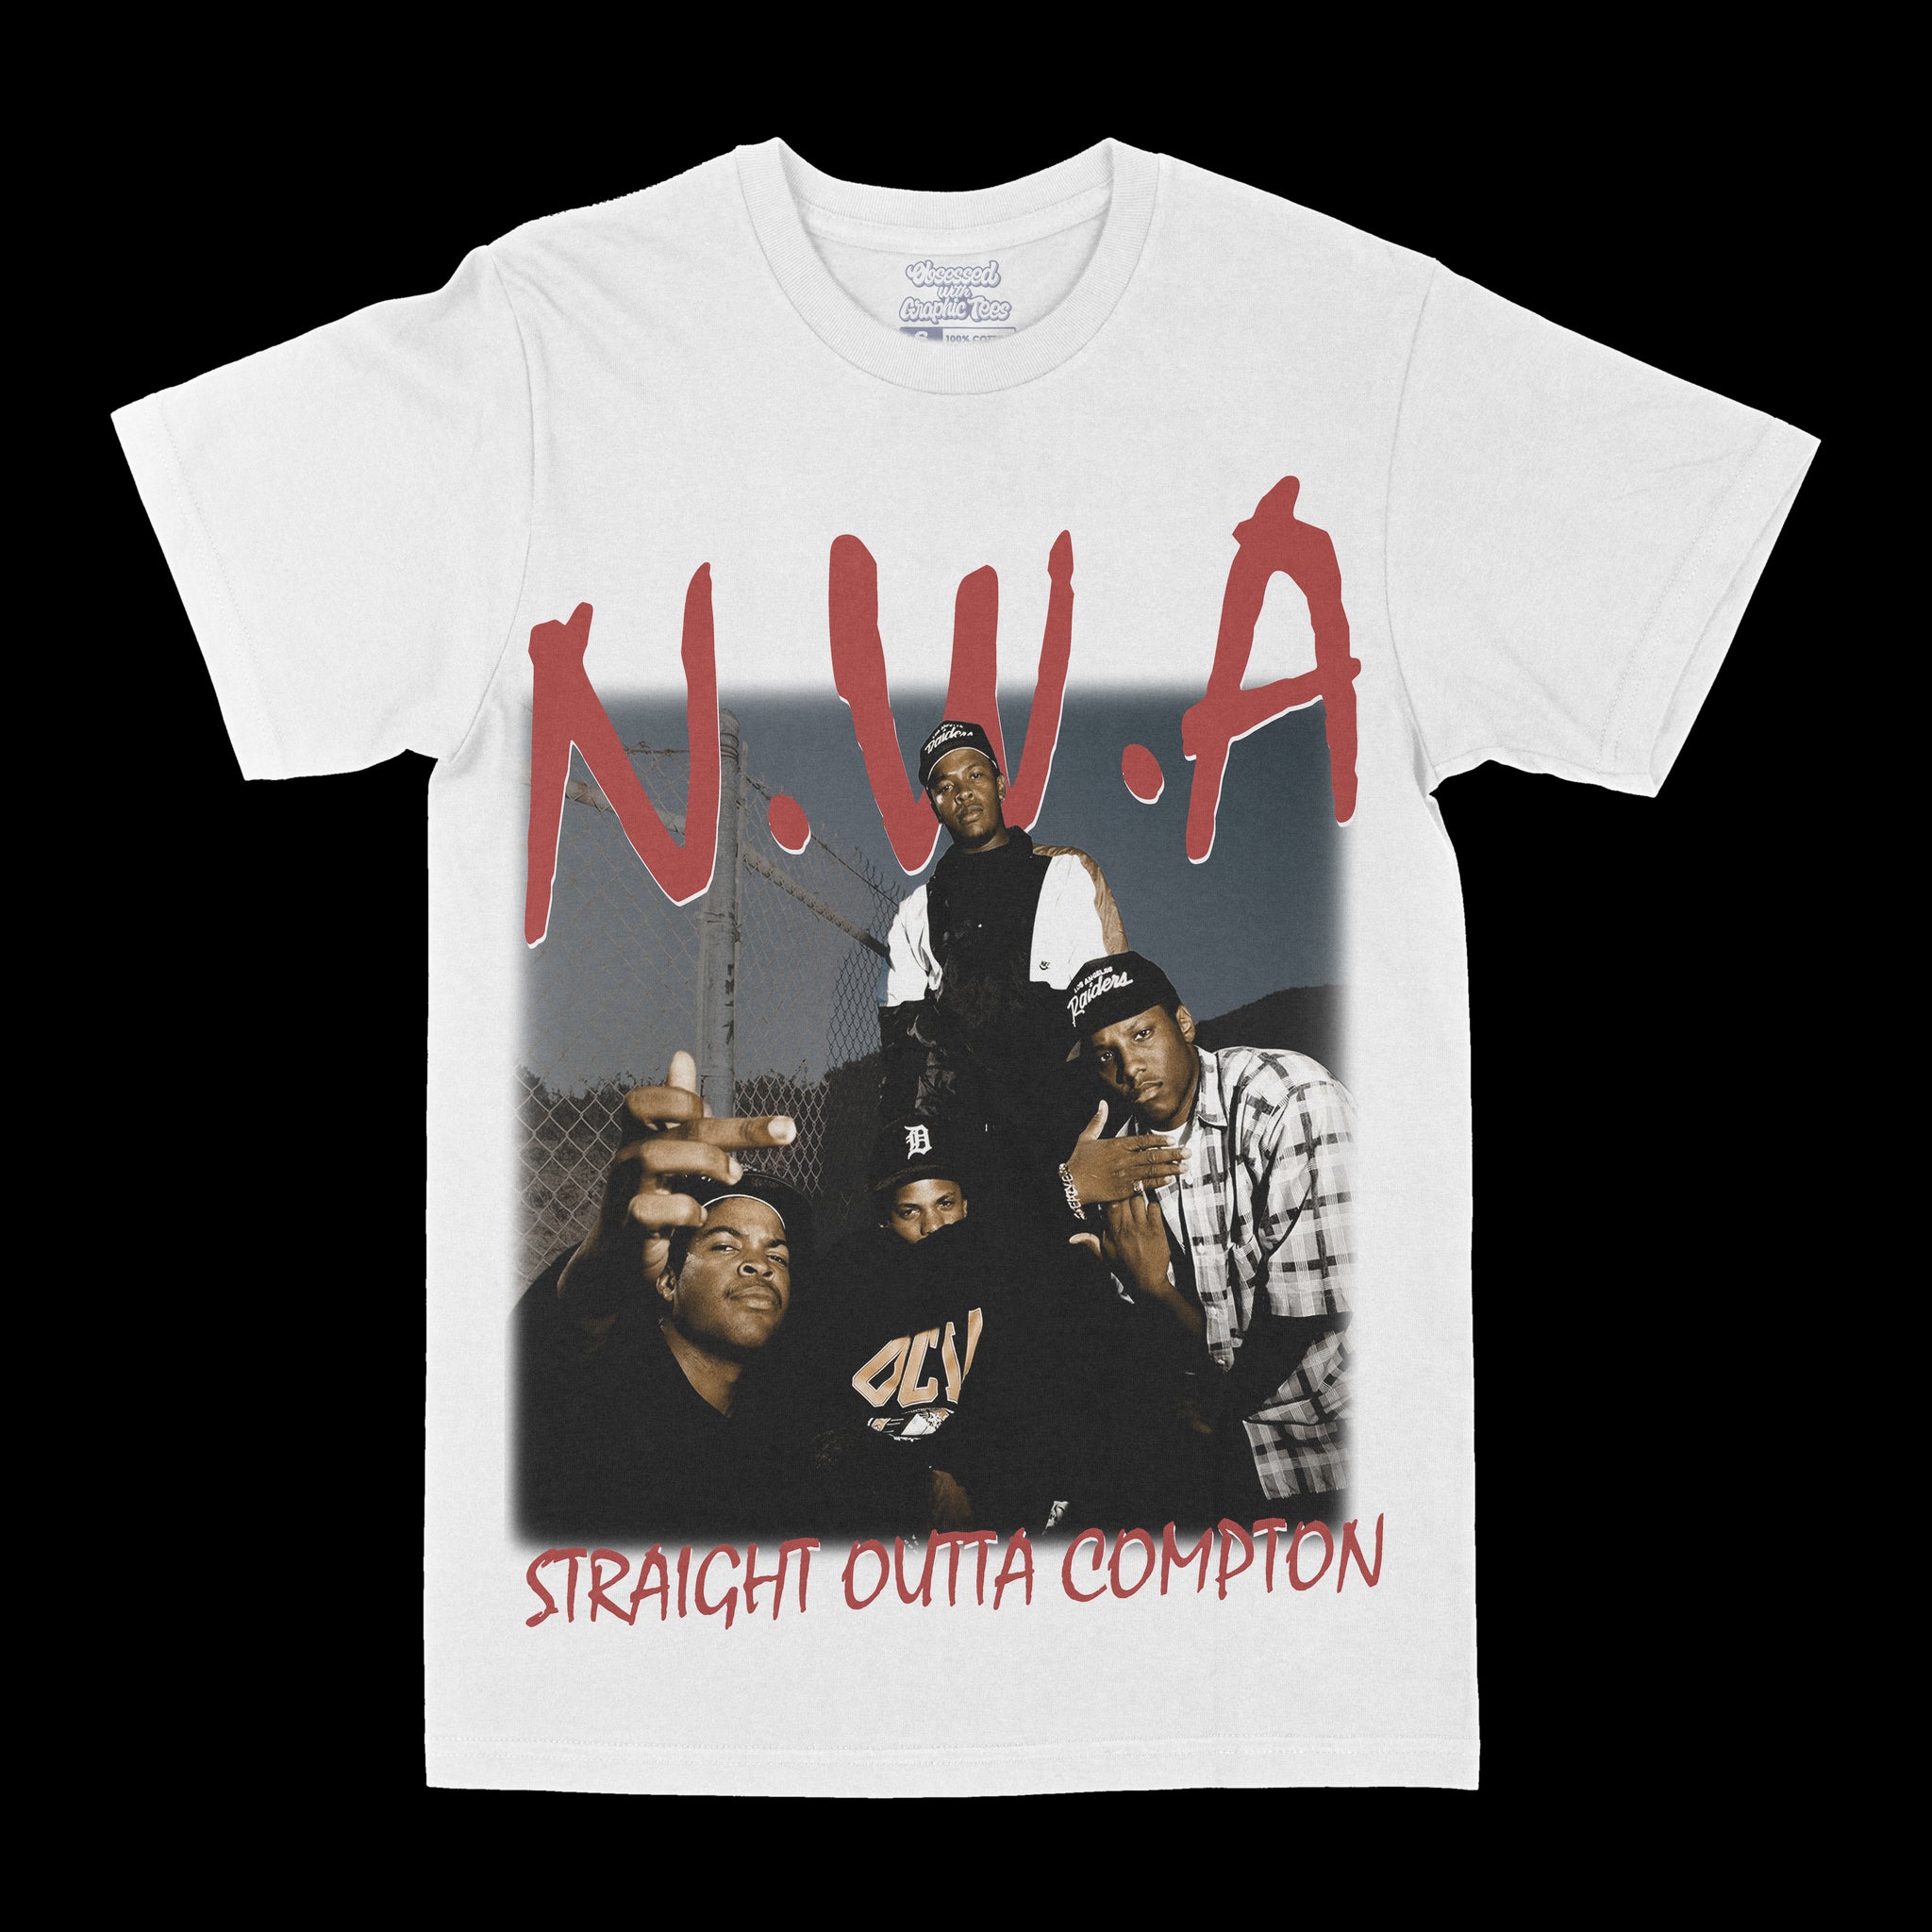 N.W.A. "Straight Outta Compton" Graphic Tee